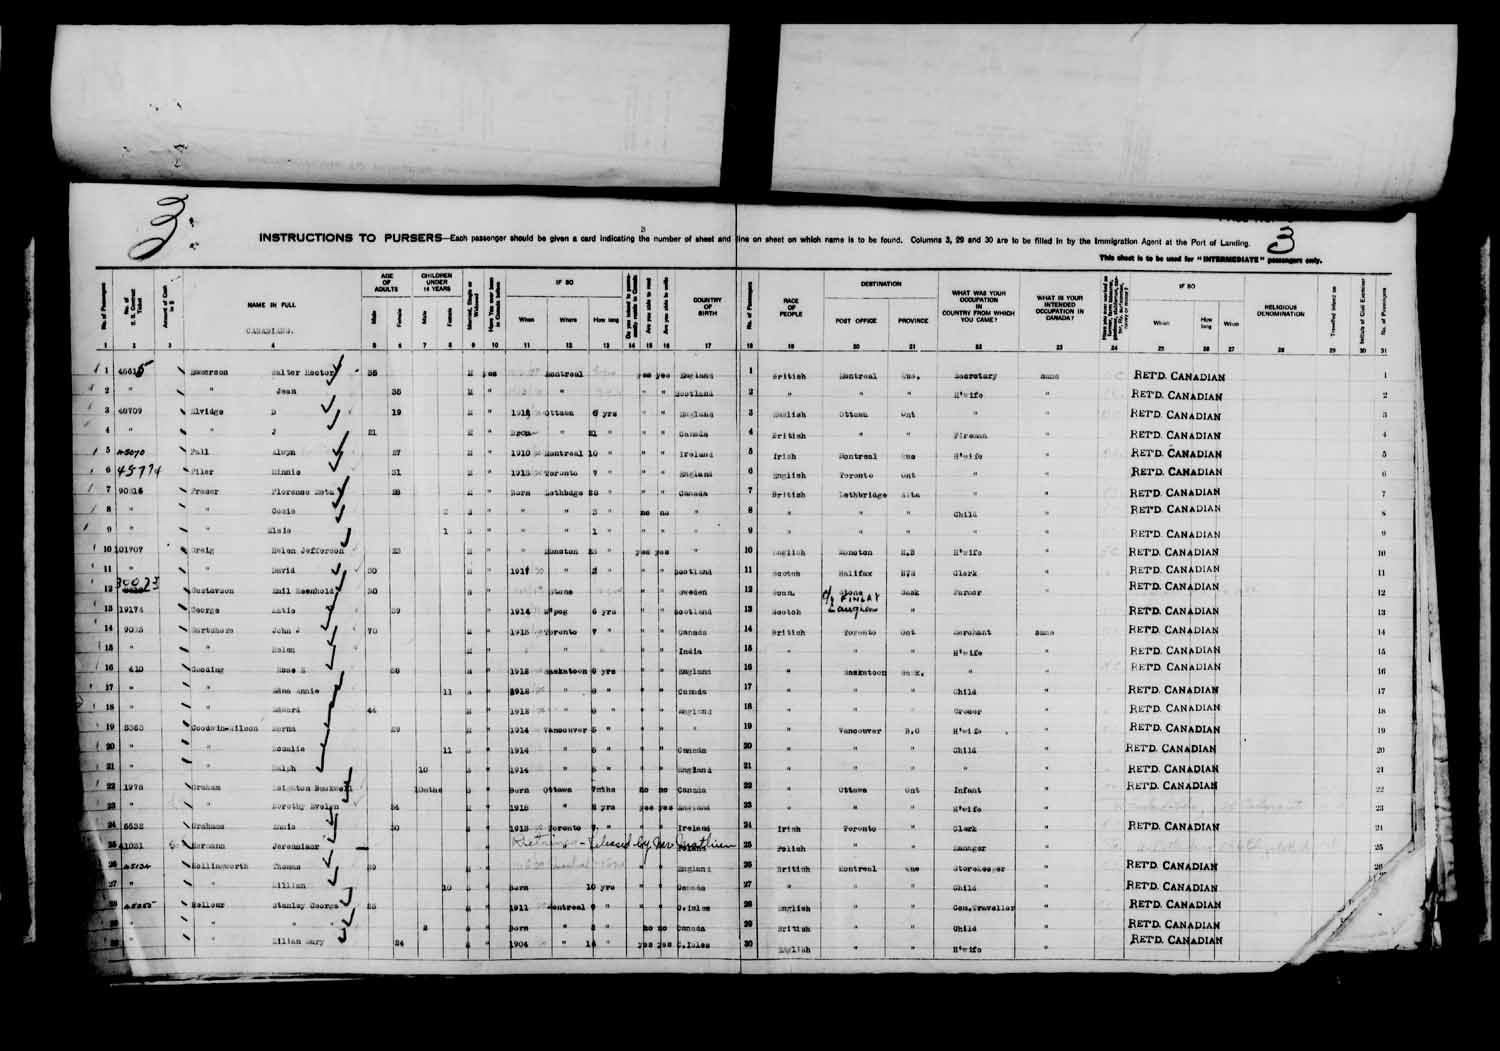 Digitized page of Passenger Lists for Image No.: e003610610